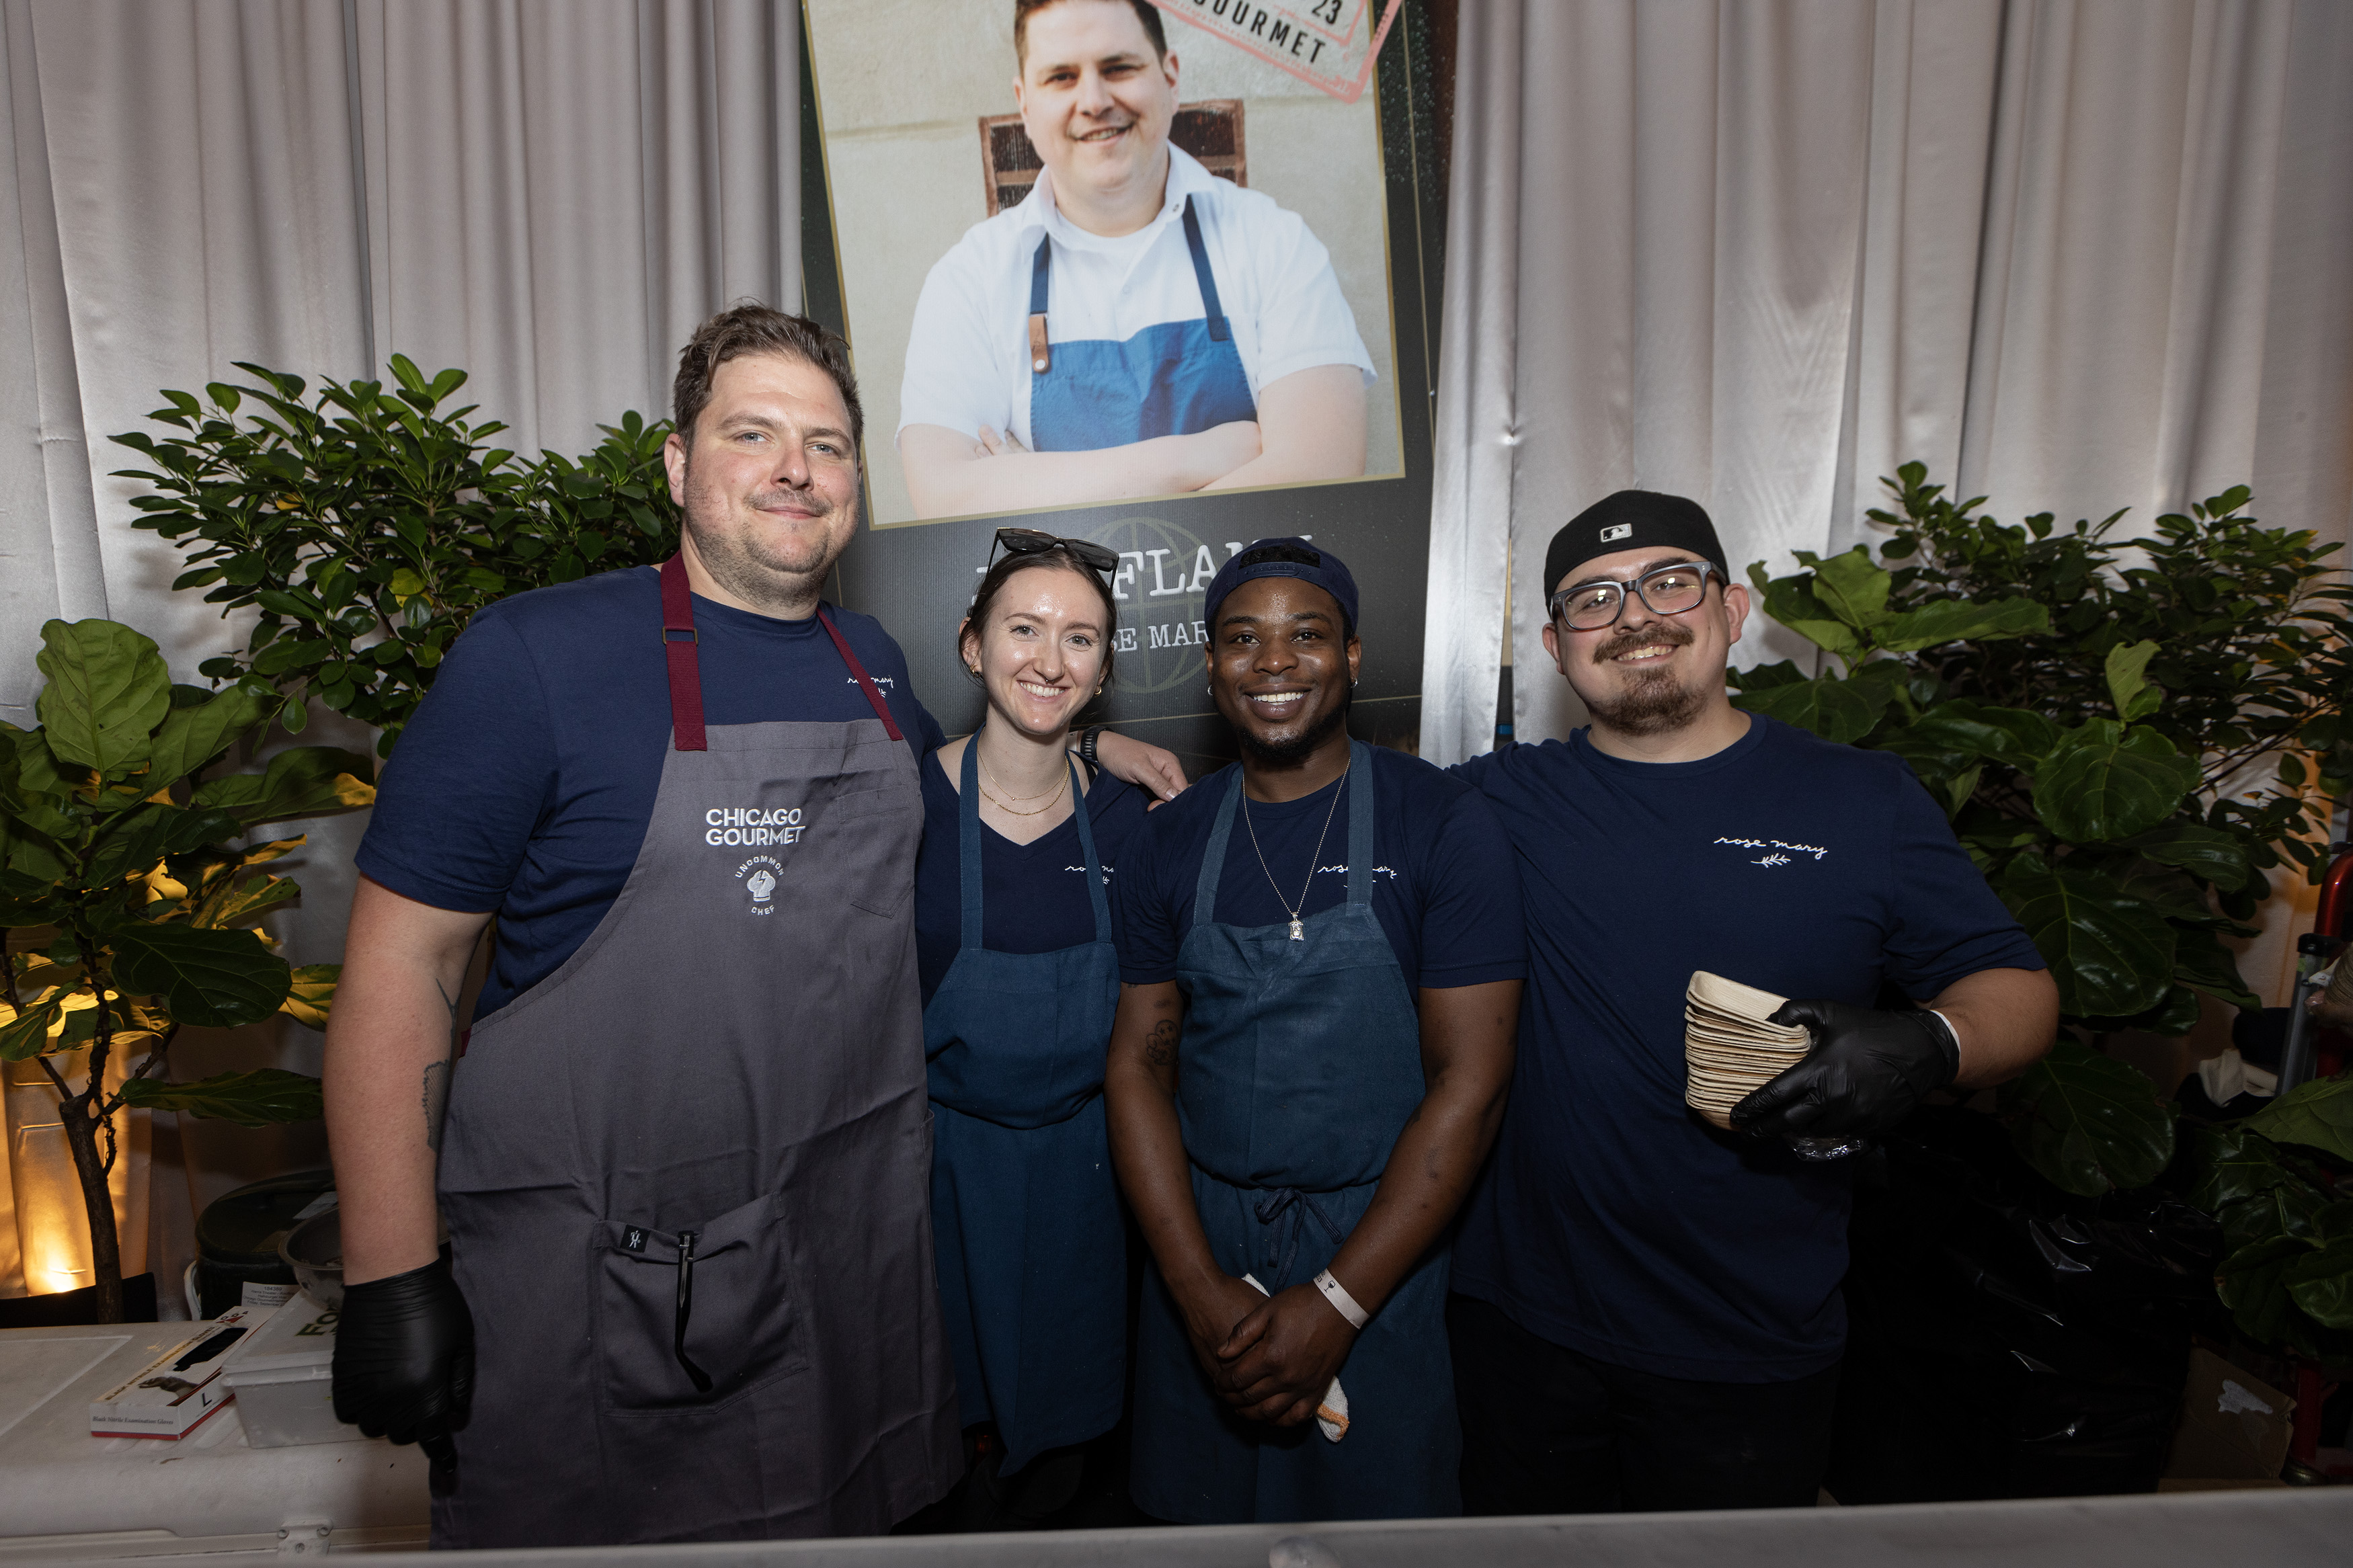 A group of four folks in aprons posing, including Joe Flamm on the left.